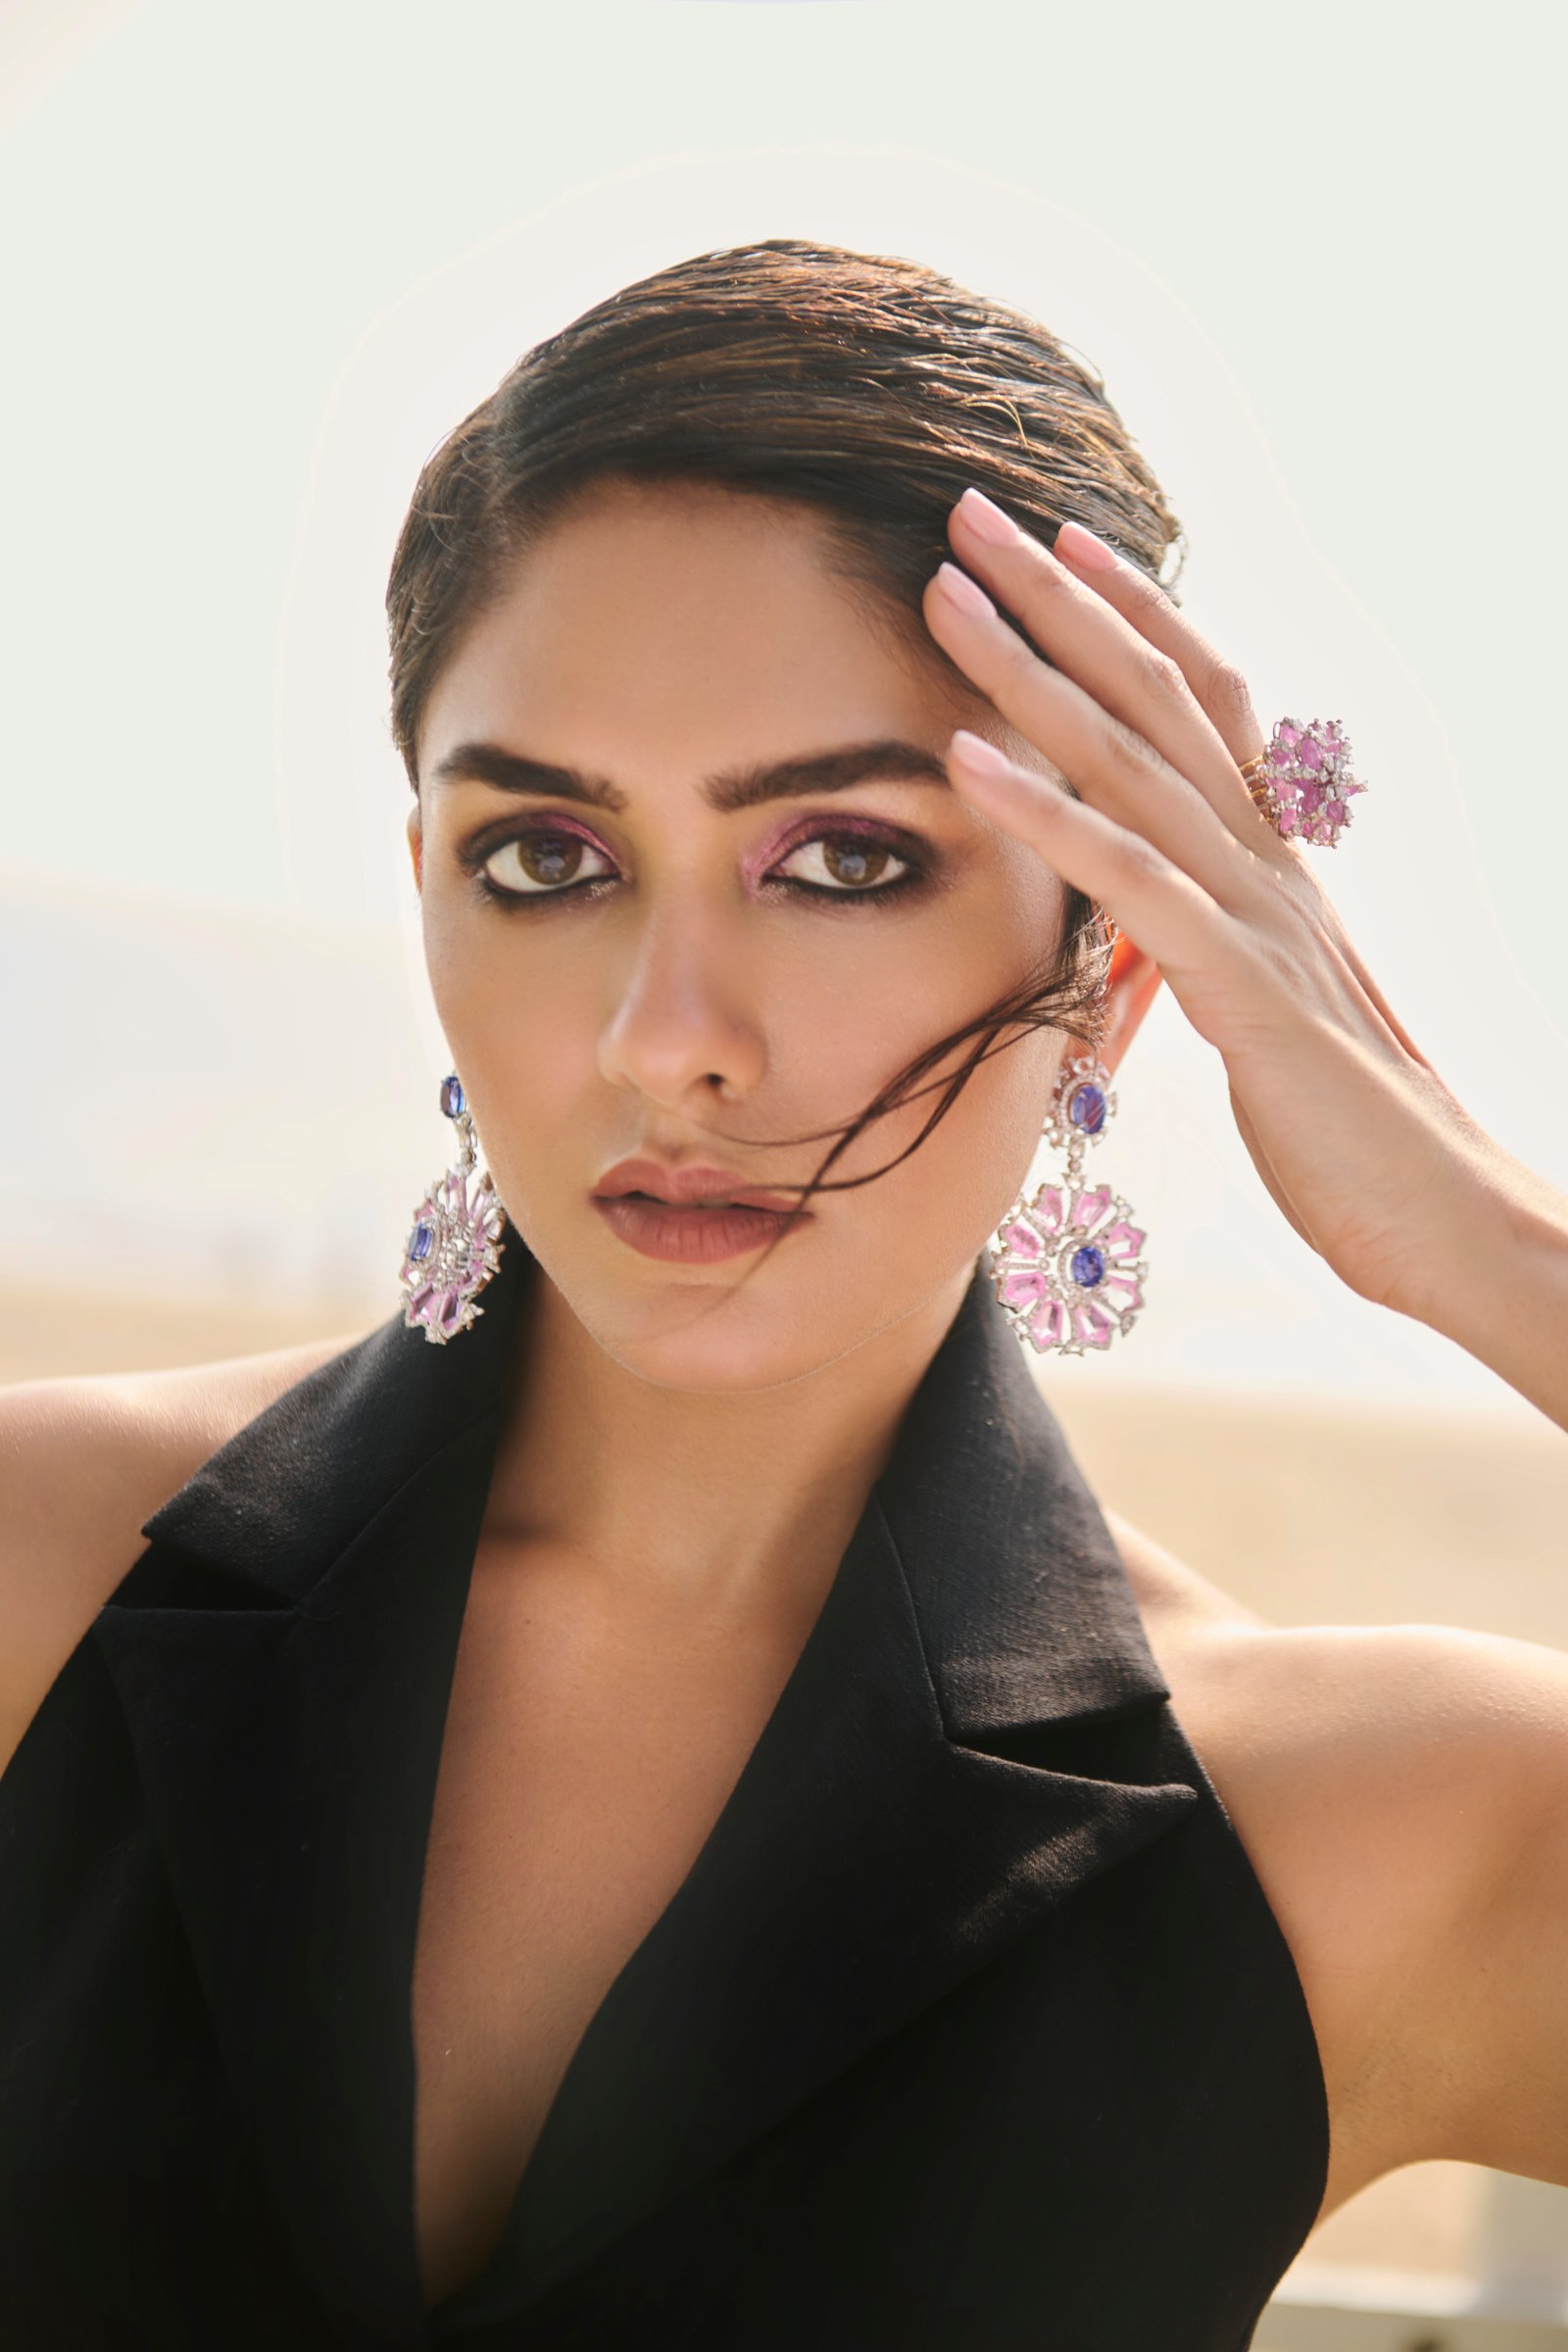 Mrunal Thakur: I Take Great Care in Deciding Which Brands to Endorse